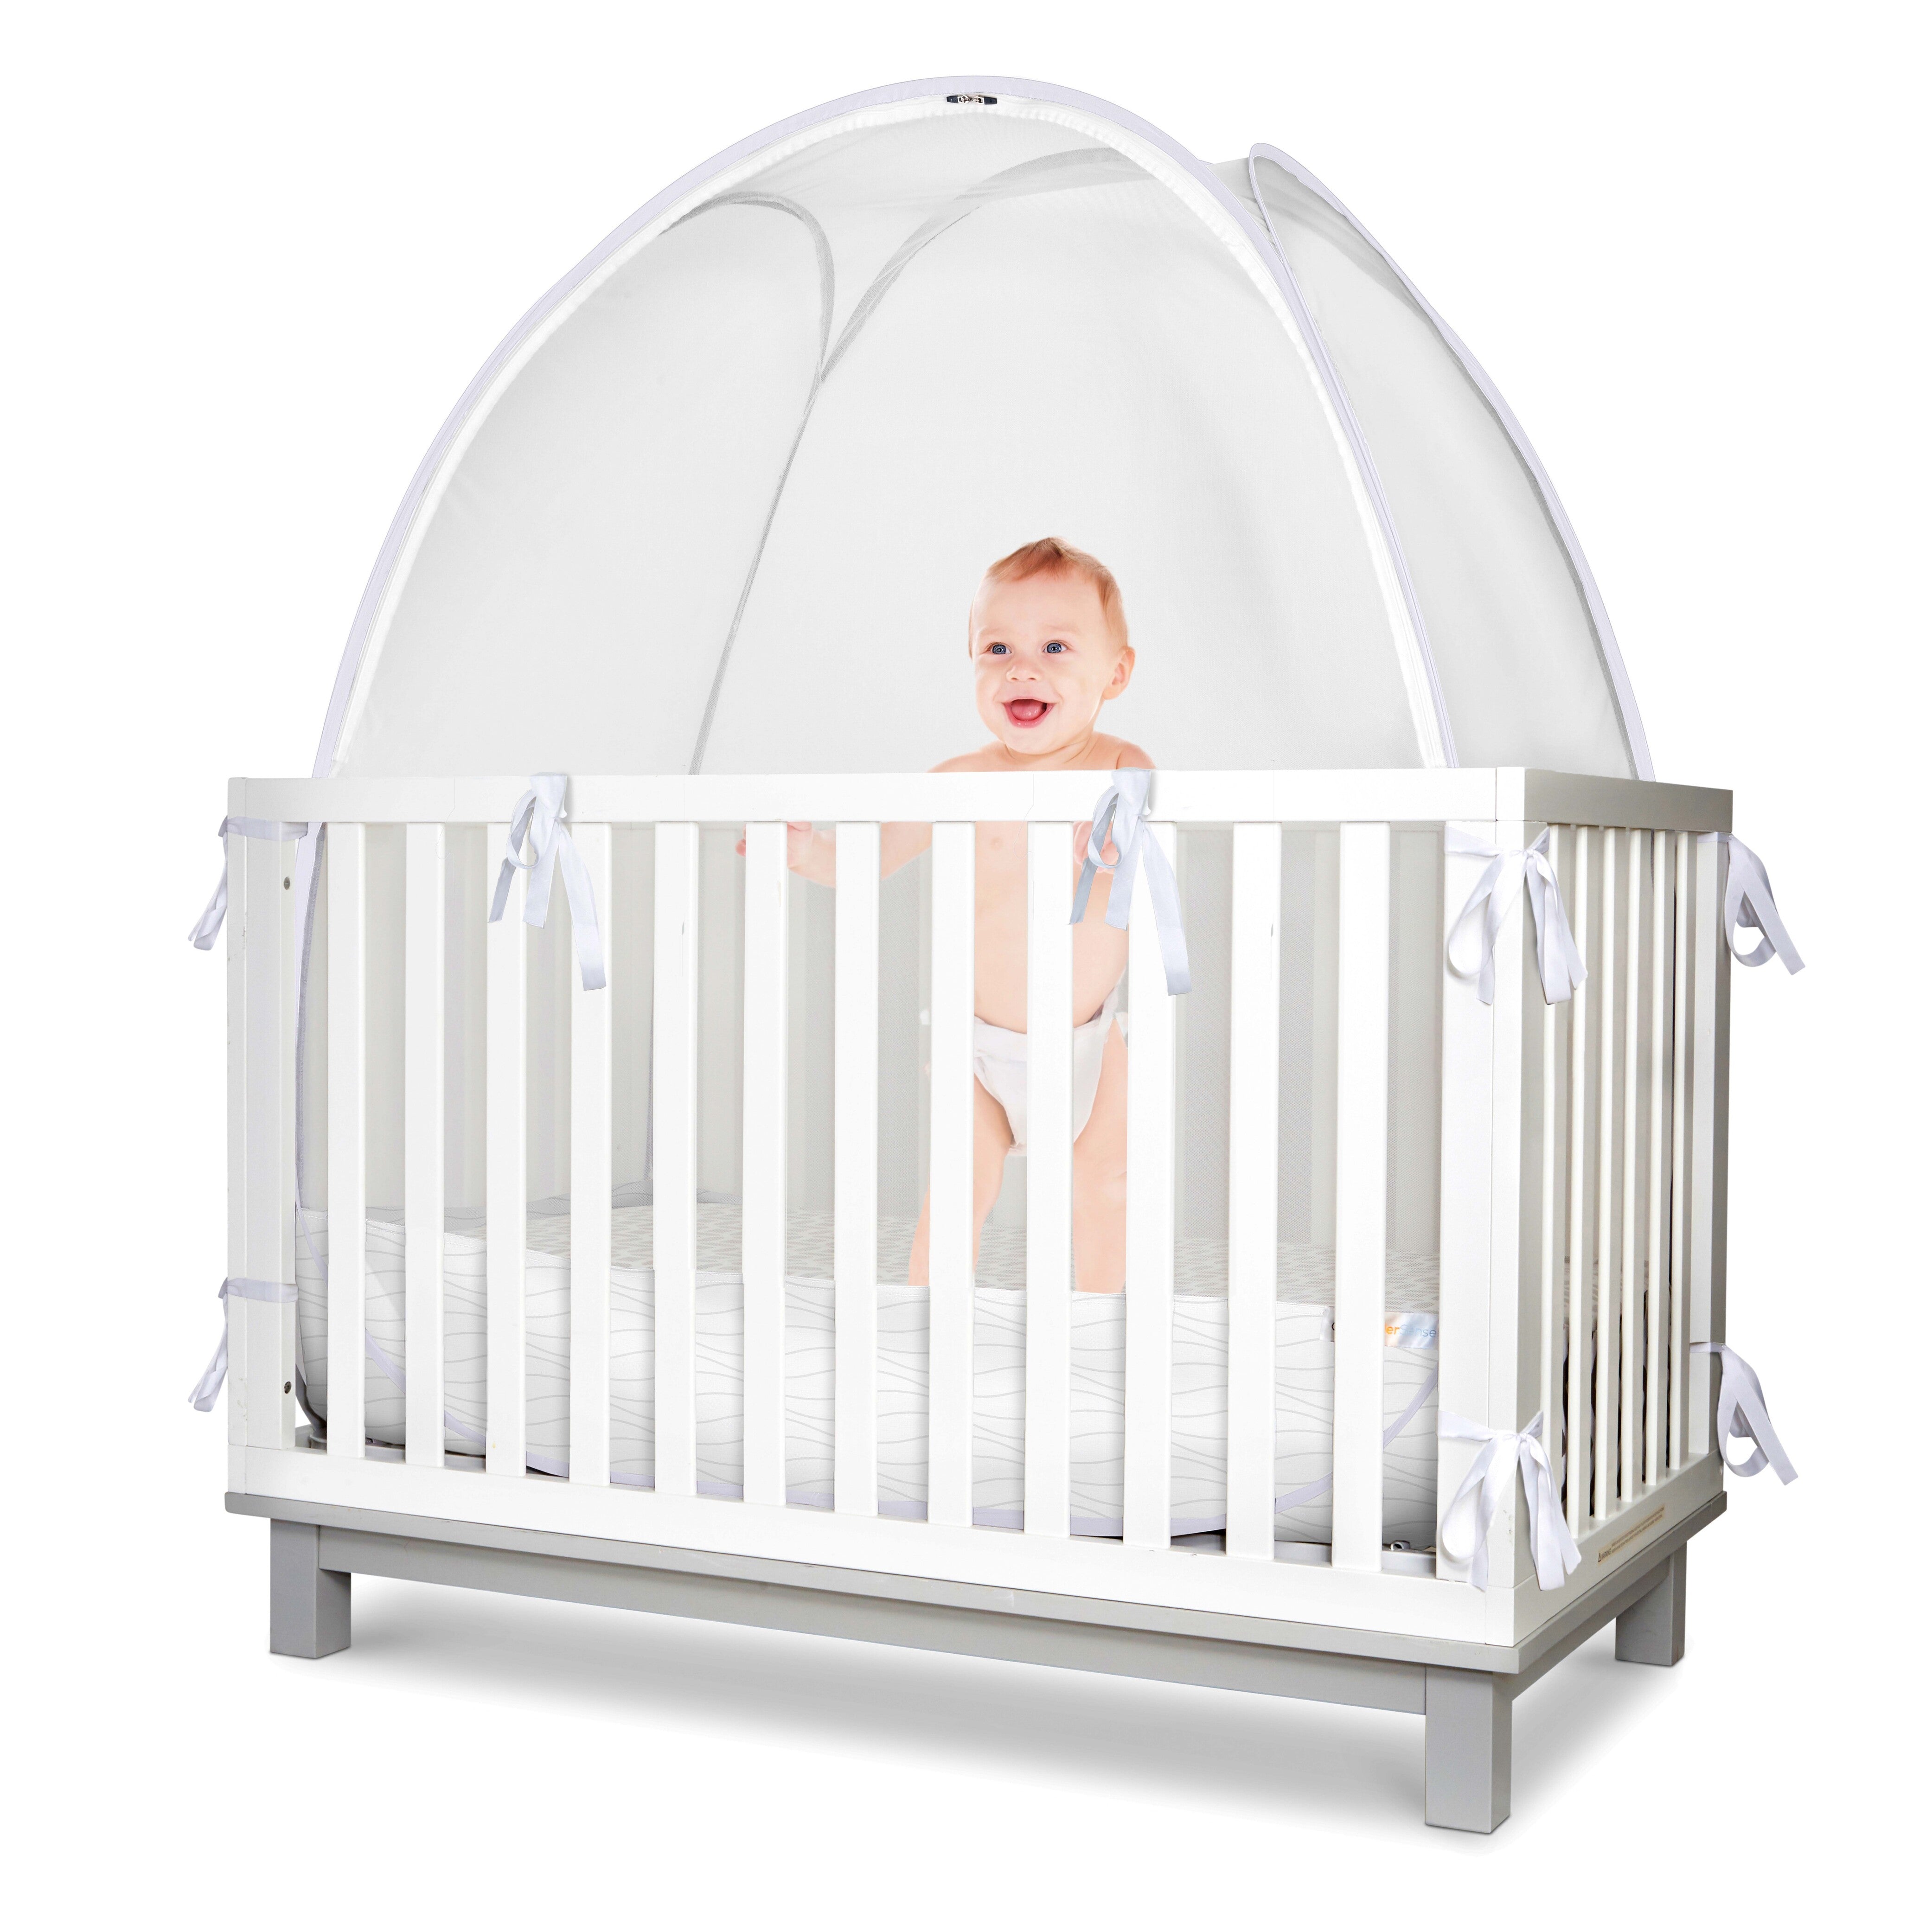 Crib Safety Tent - Top Rated For Crib Safety